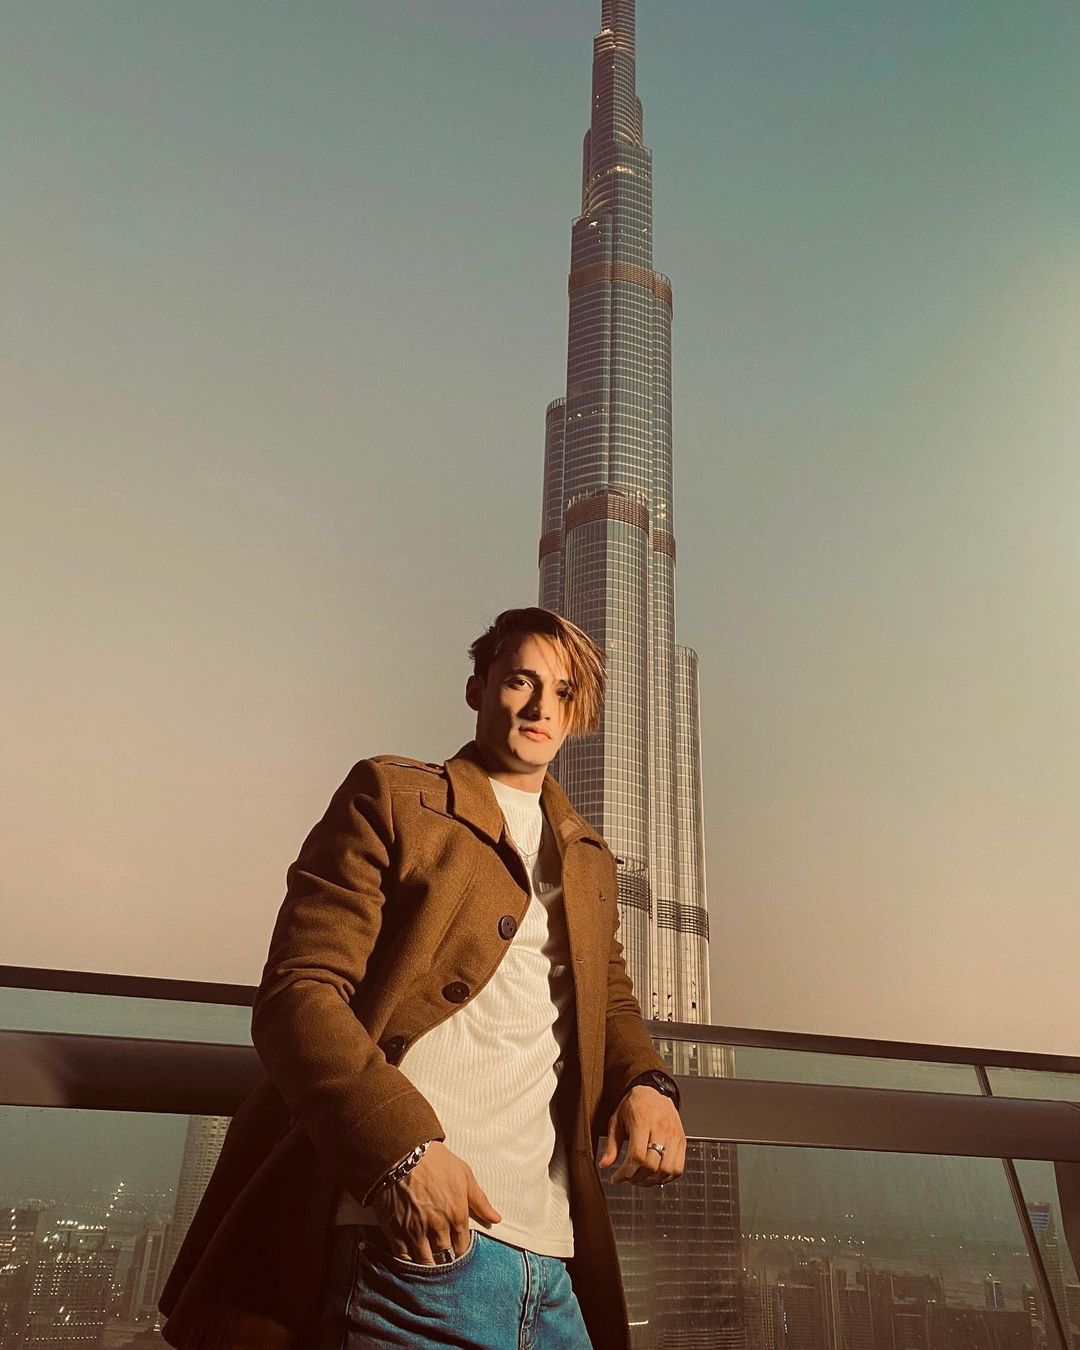 Free Photos - Muslim Couple Posing For A Selfie In Front Of The Burj Khalifa  | FreePixel.com